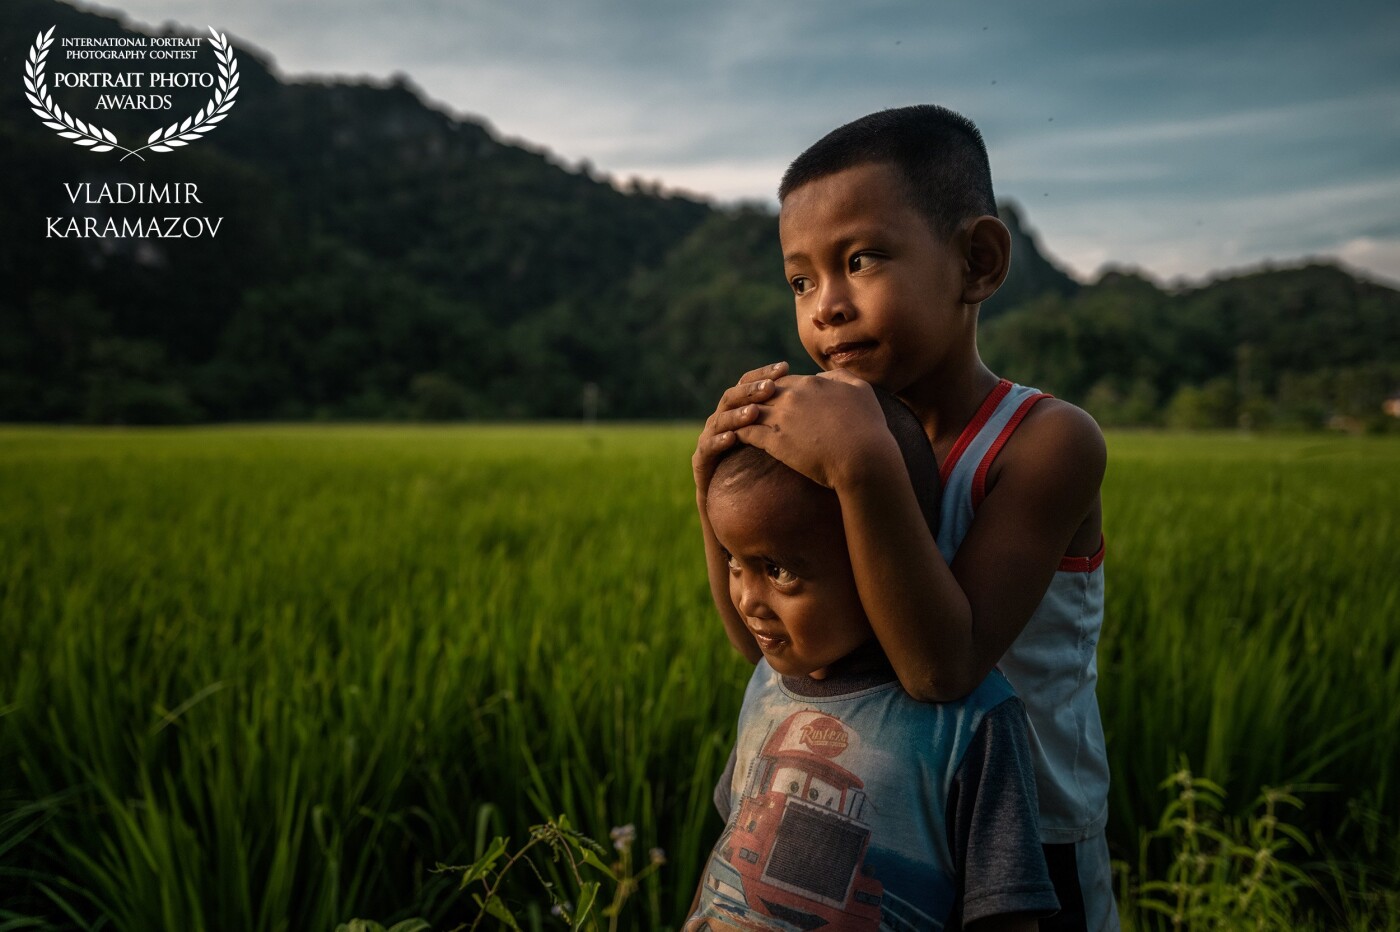 In the remote province of Camarine Sur in the Philippines. Where people live like in the 18th century. Everything is clean there and the children grow up among the rice fields.